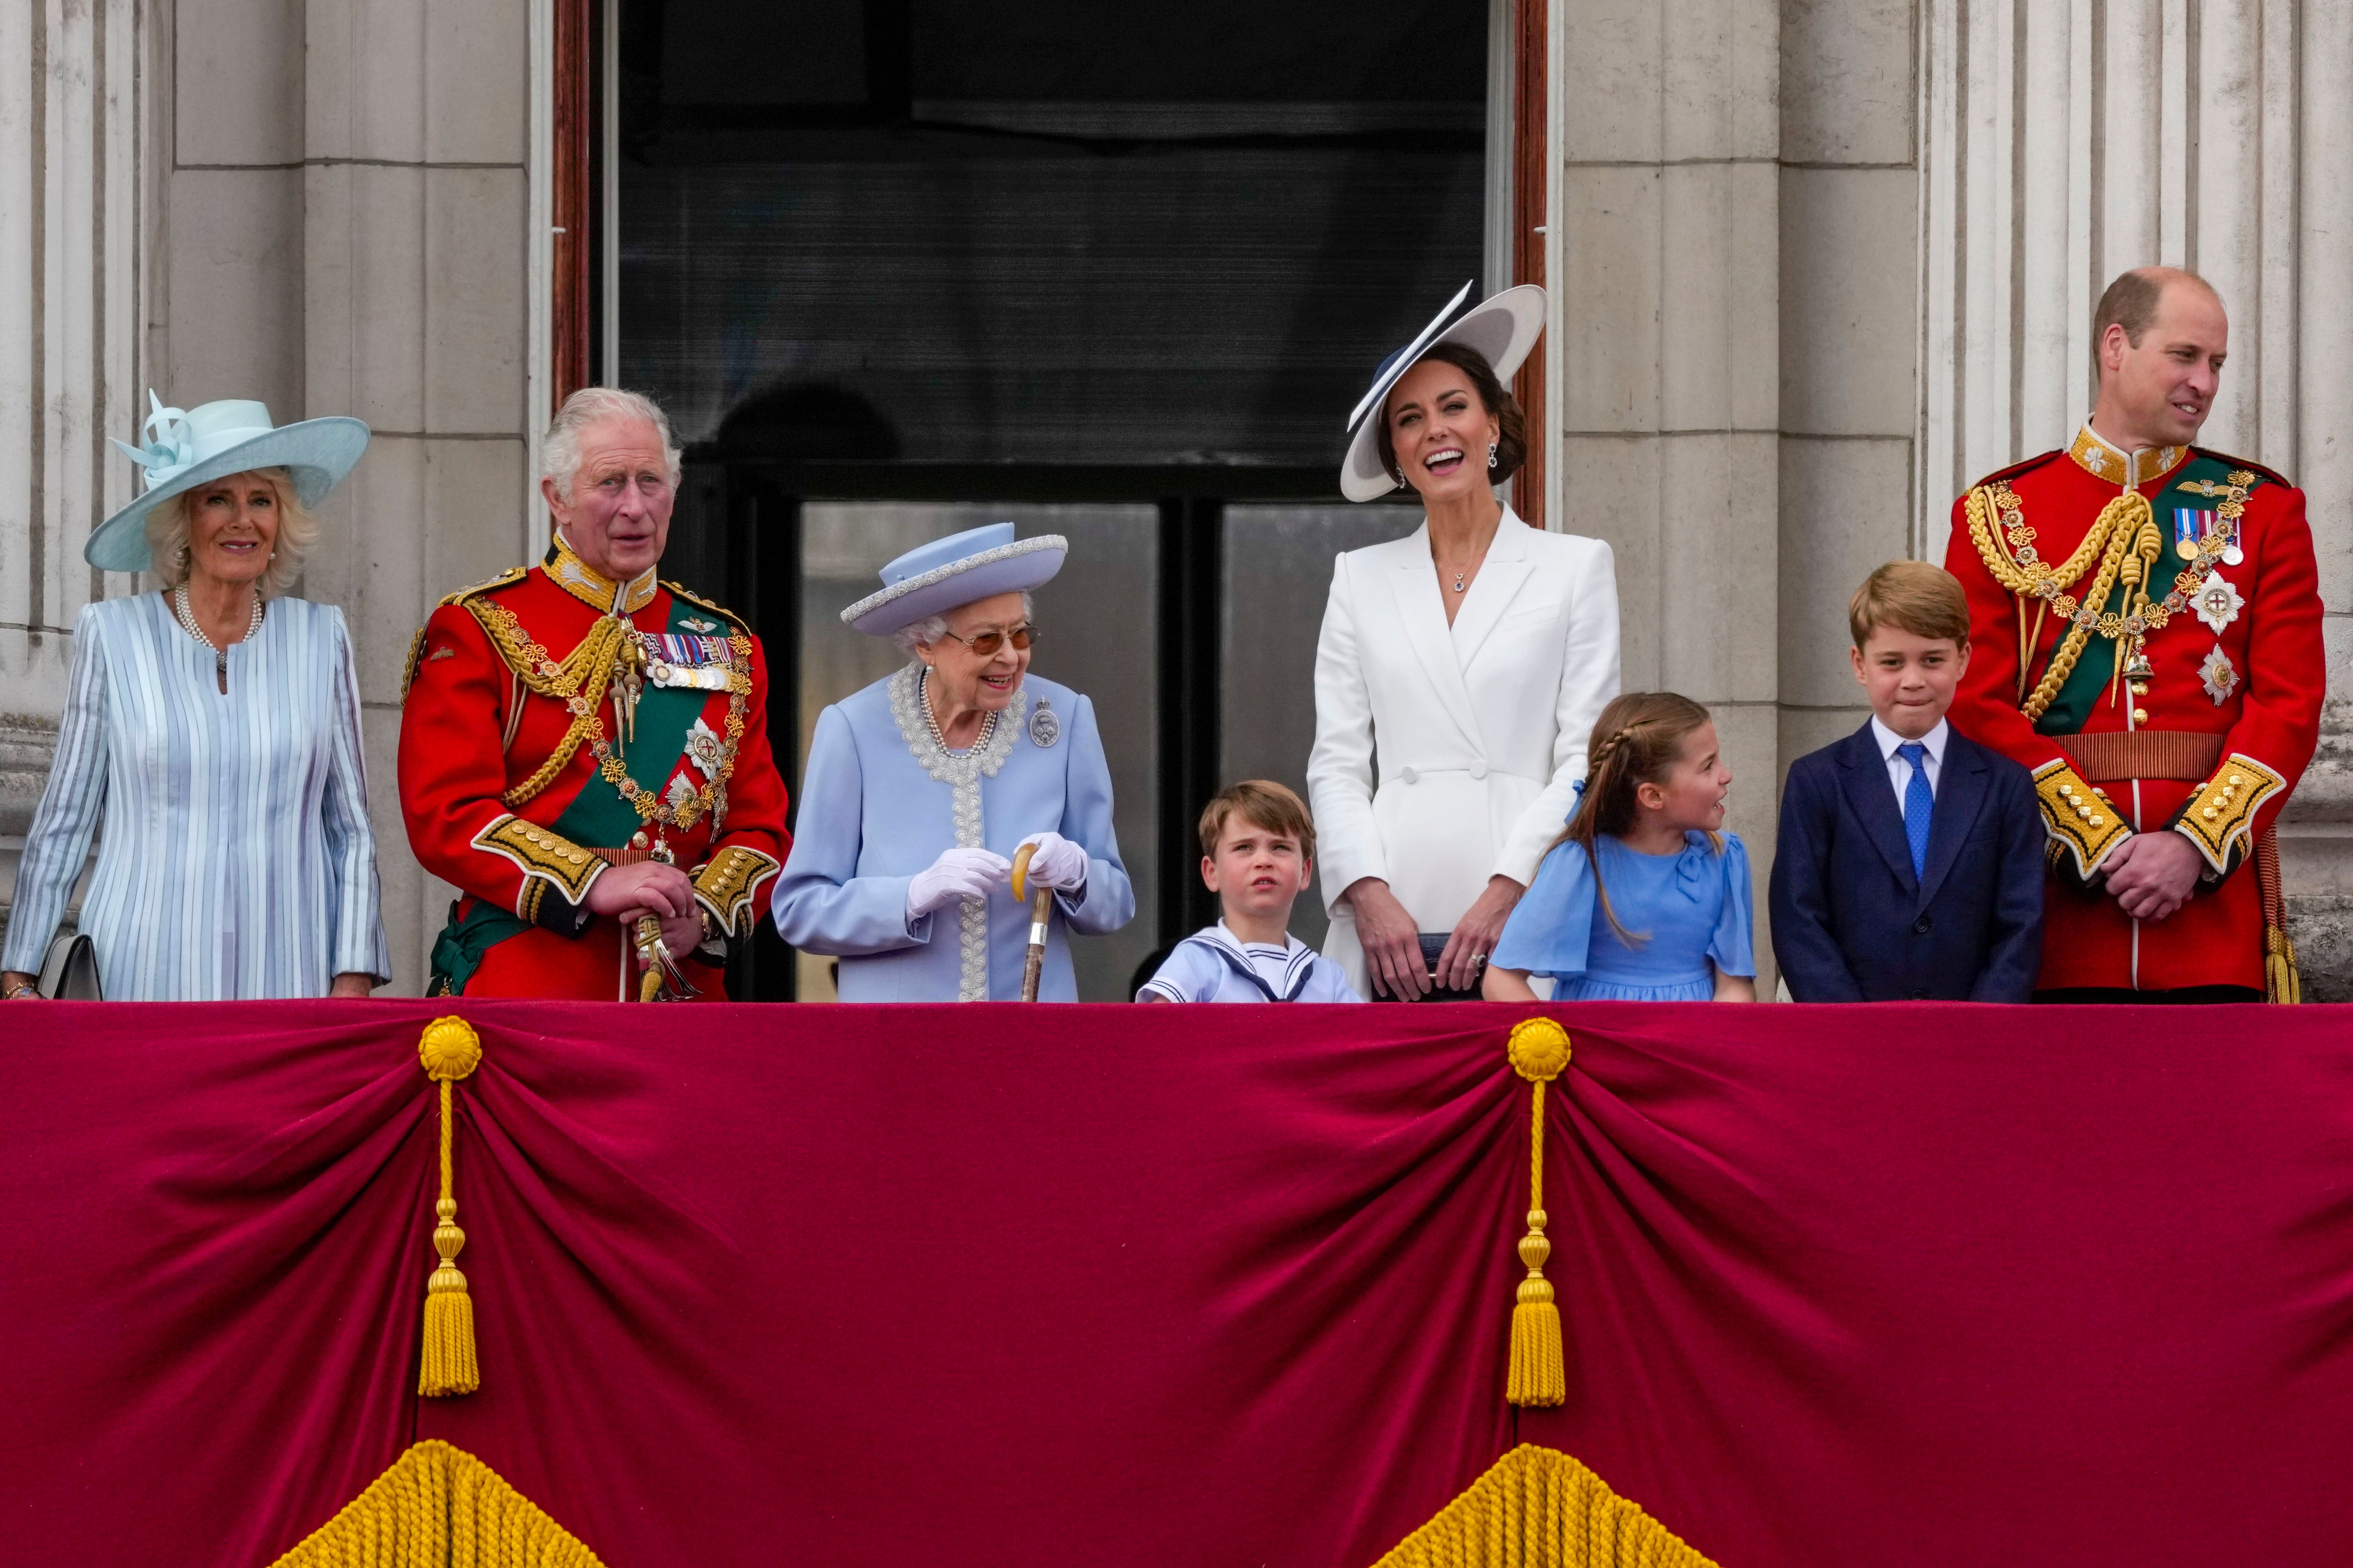 Harry and Meghan were not present for Jubilee balcony celebrations after stepping down as working royals